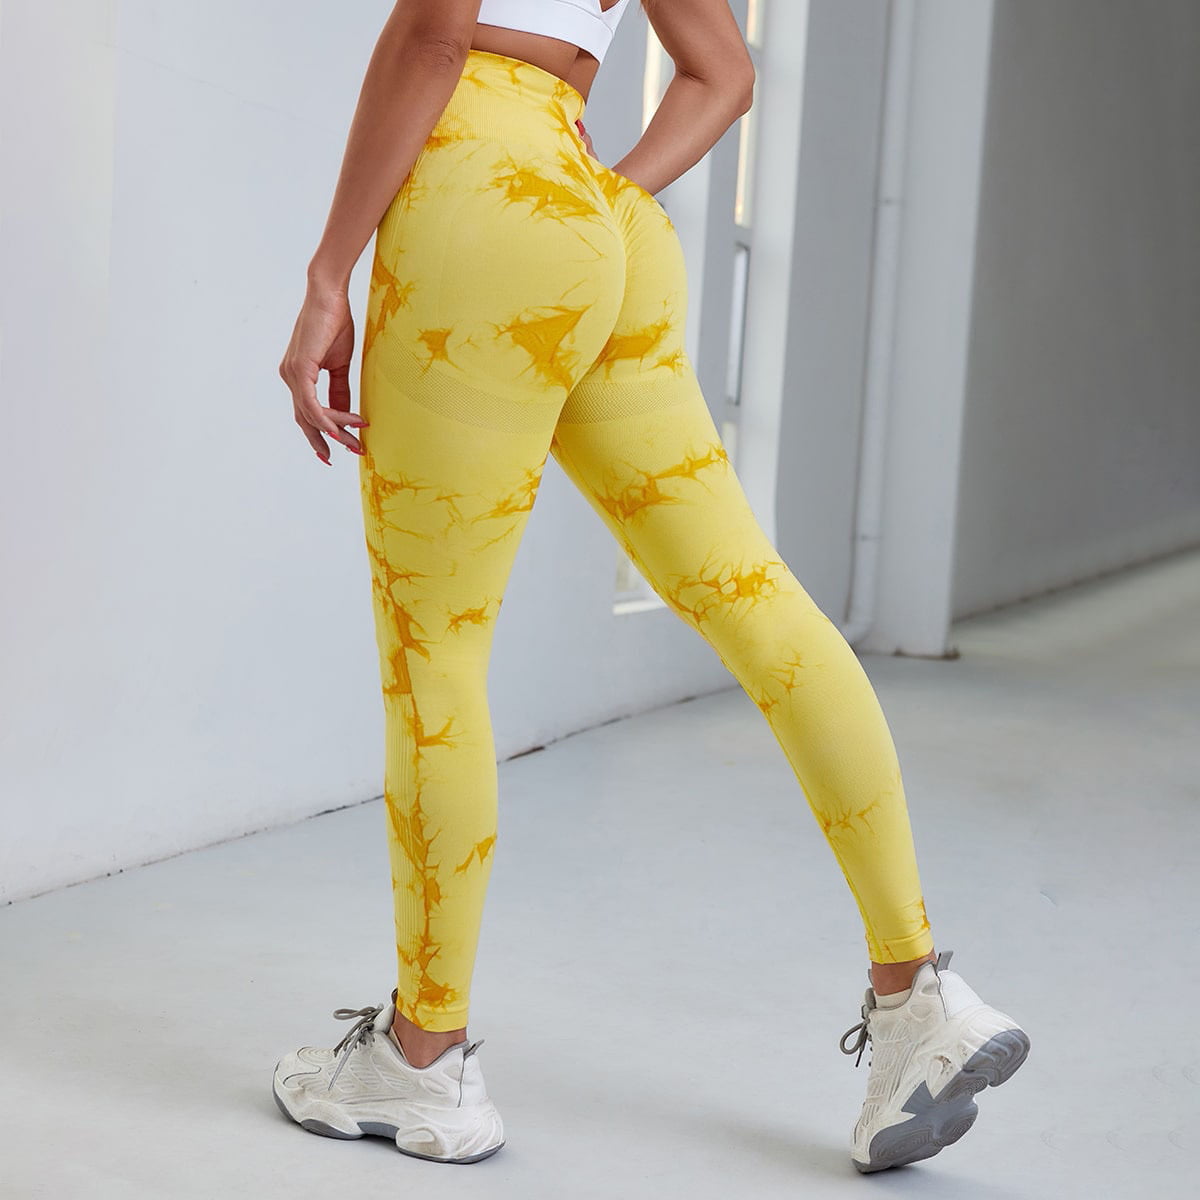 Dye Women Fitness For Clothing Up Tie Pants Gym Legging Workout Sports Seamless Leggings High Push Waist Tights Ladies Yoga